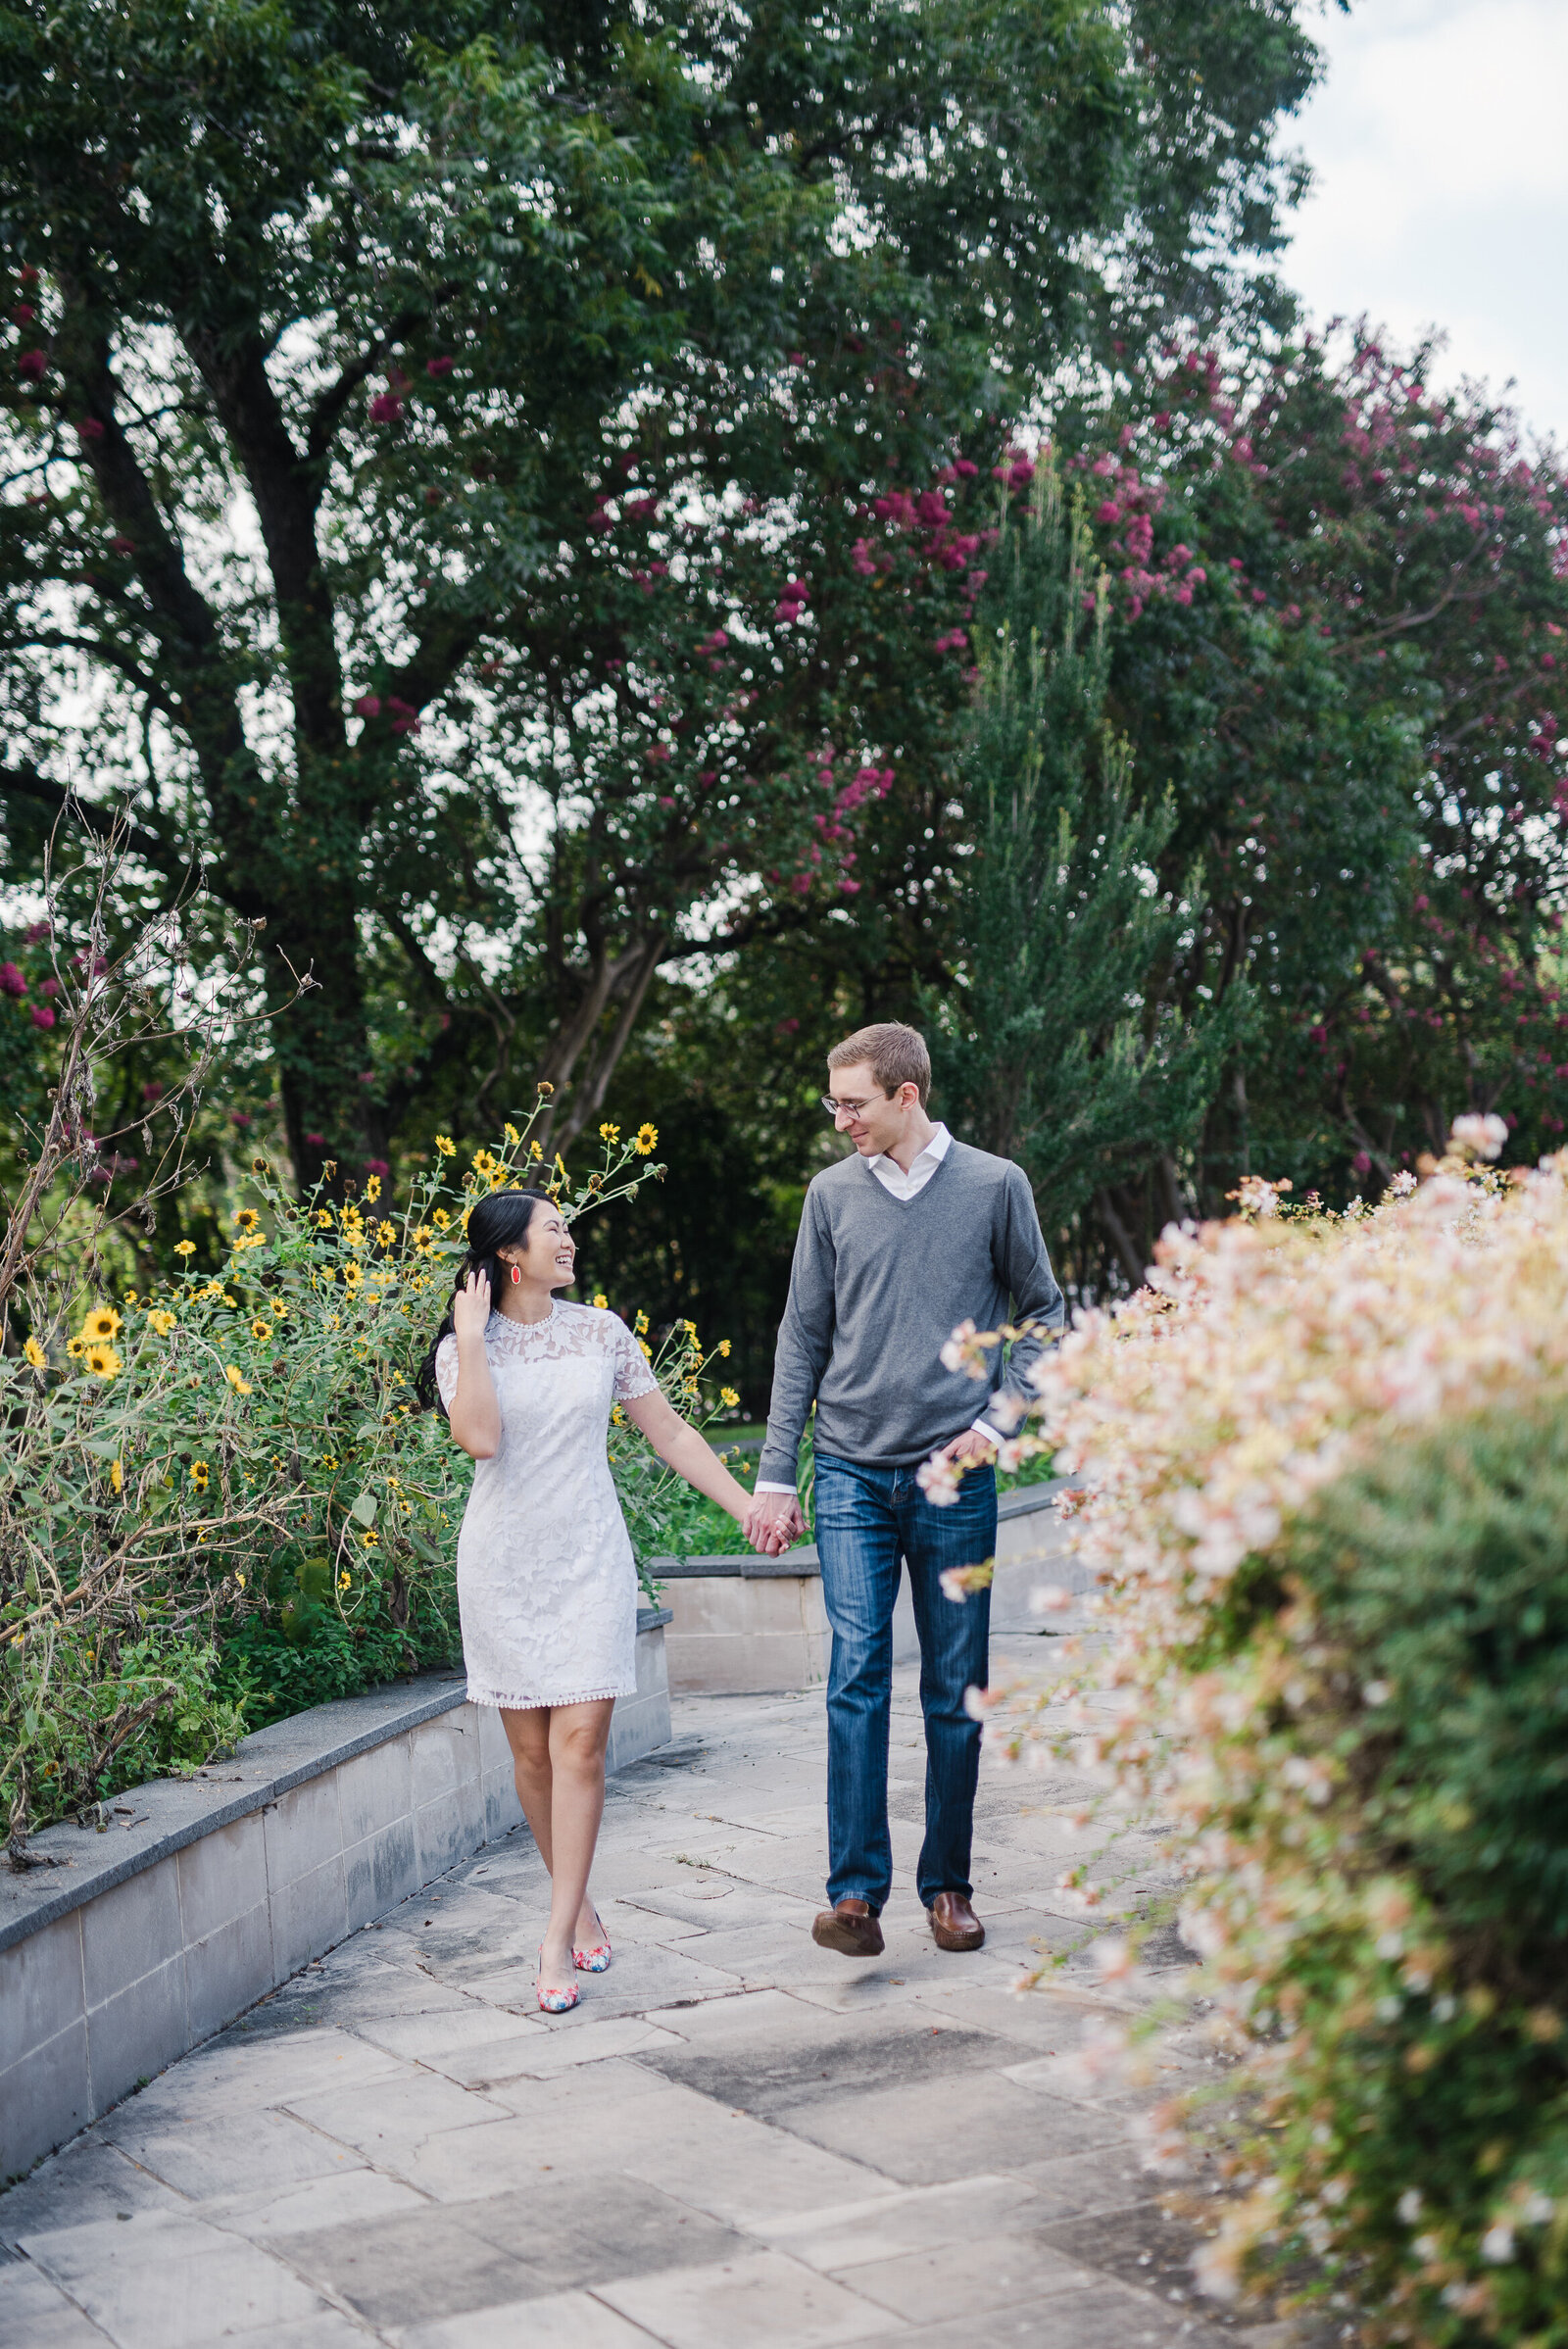 jen-symes-engagement-texas-discovery-gardens-21